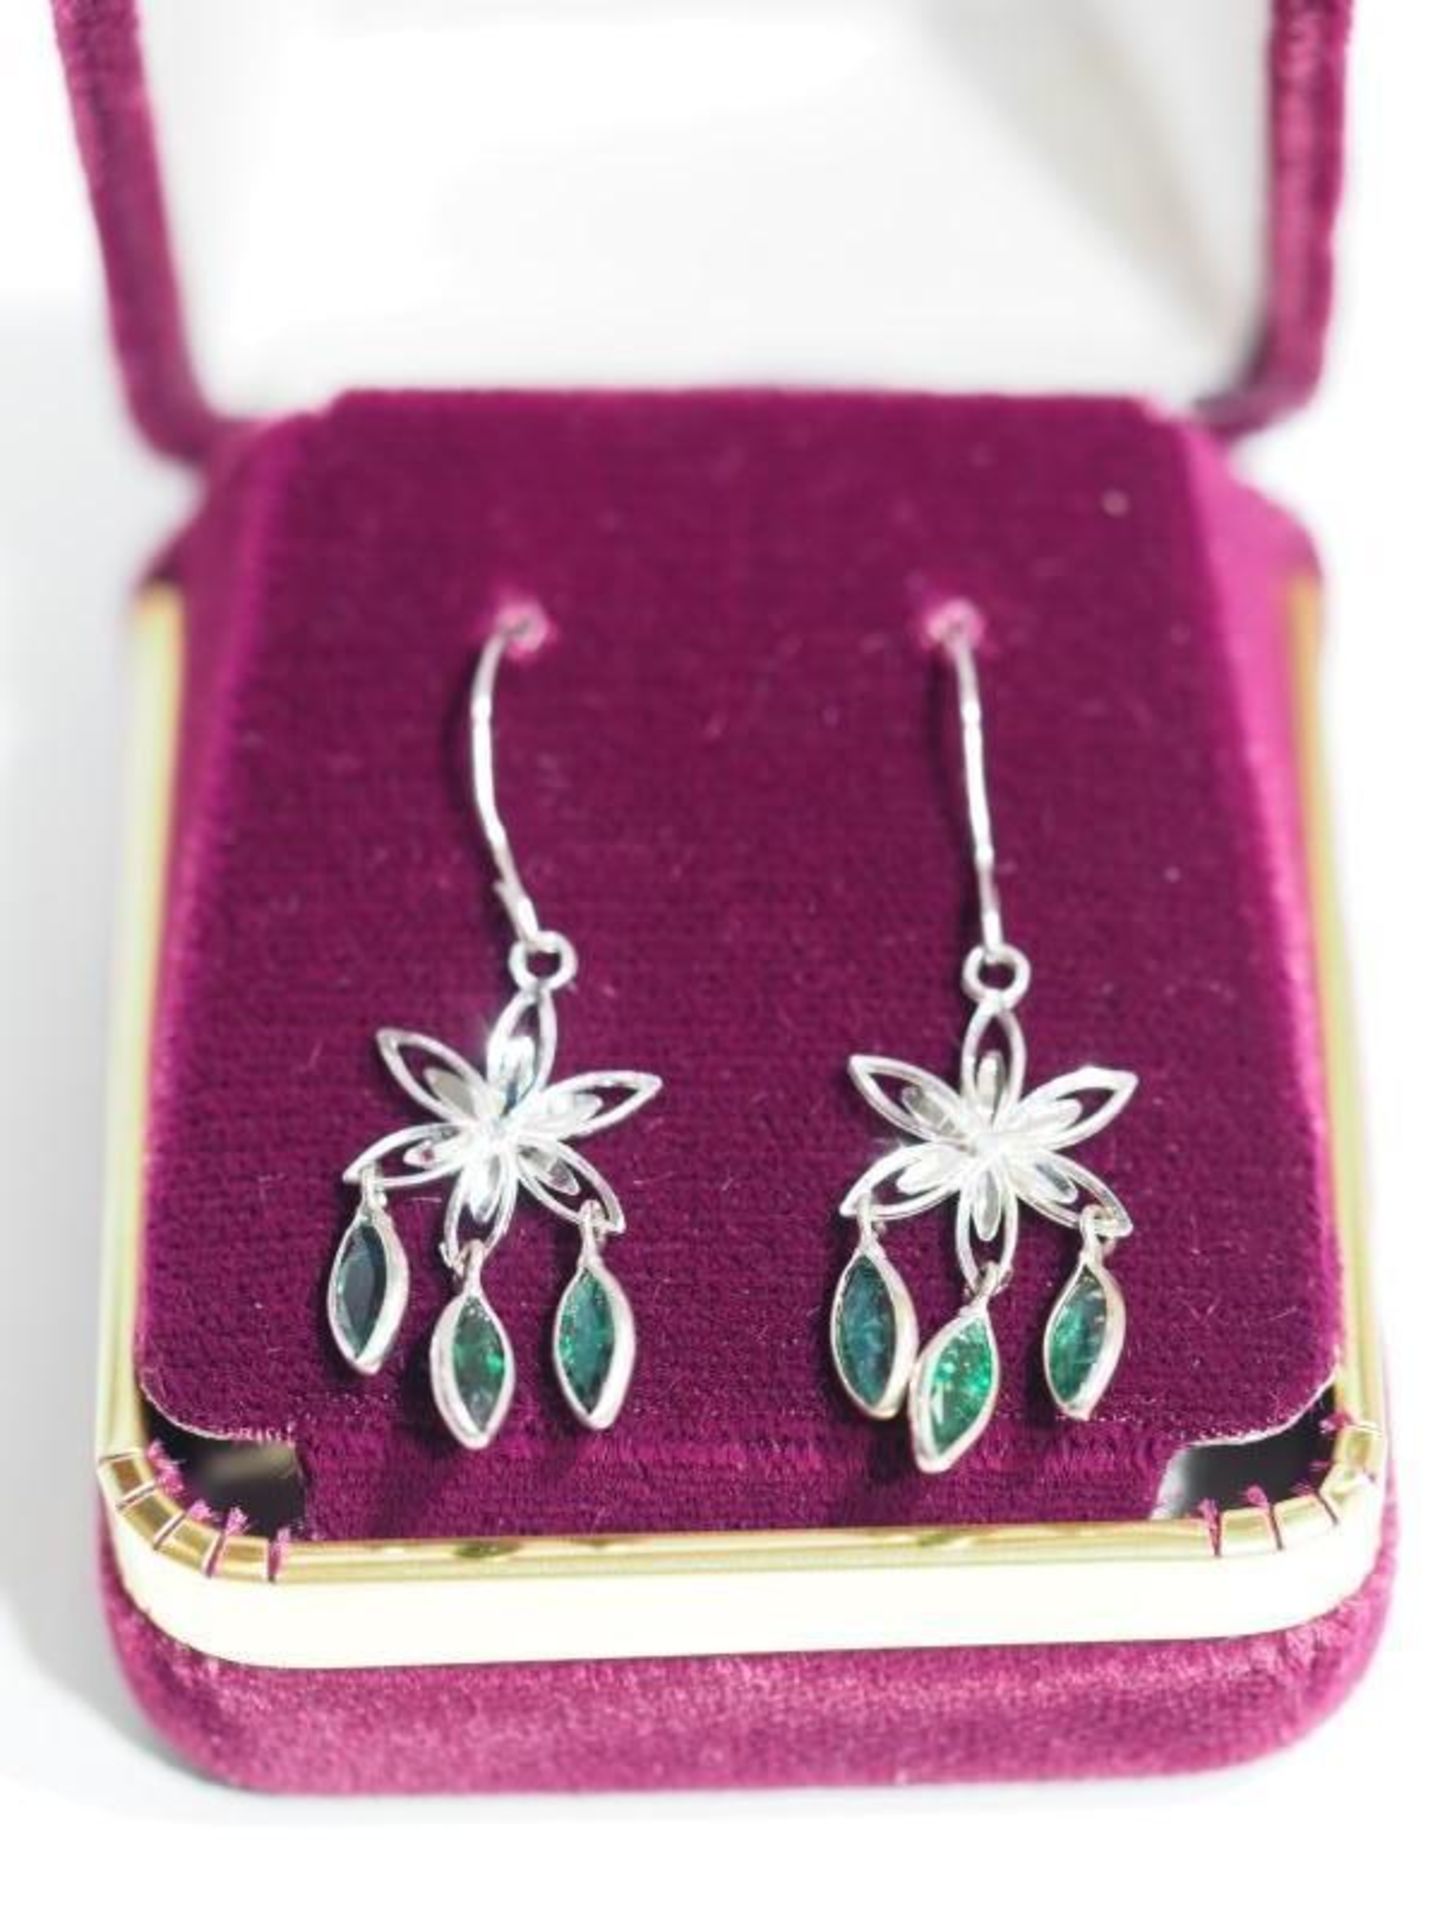 14K White Gold Emerald (1.08ct) Earrings. Retail $1200 - Image 3 of 3